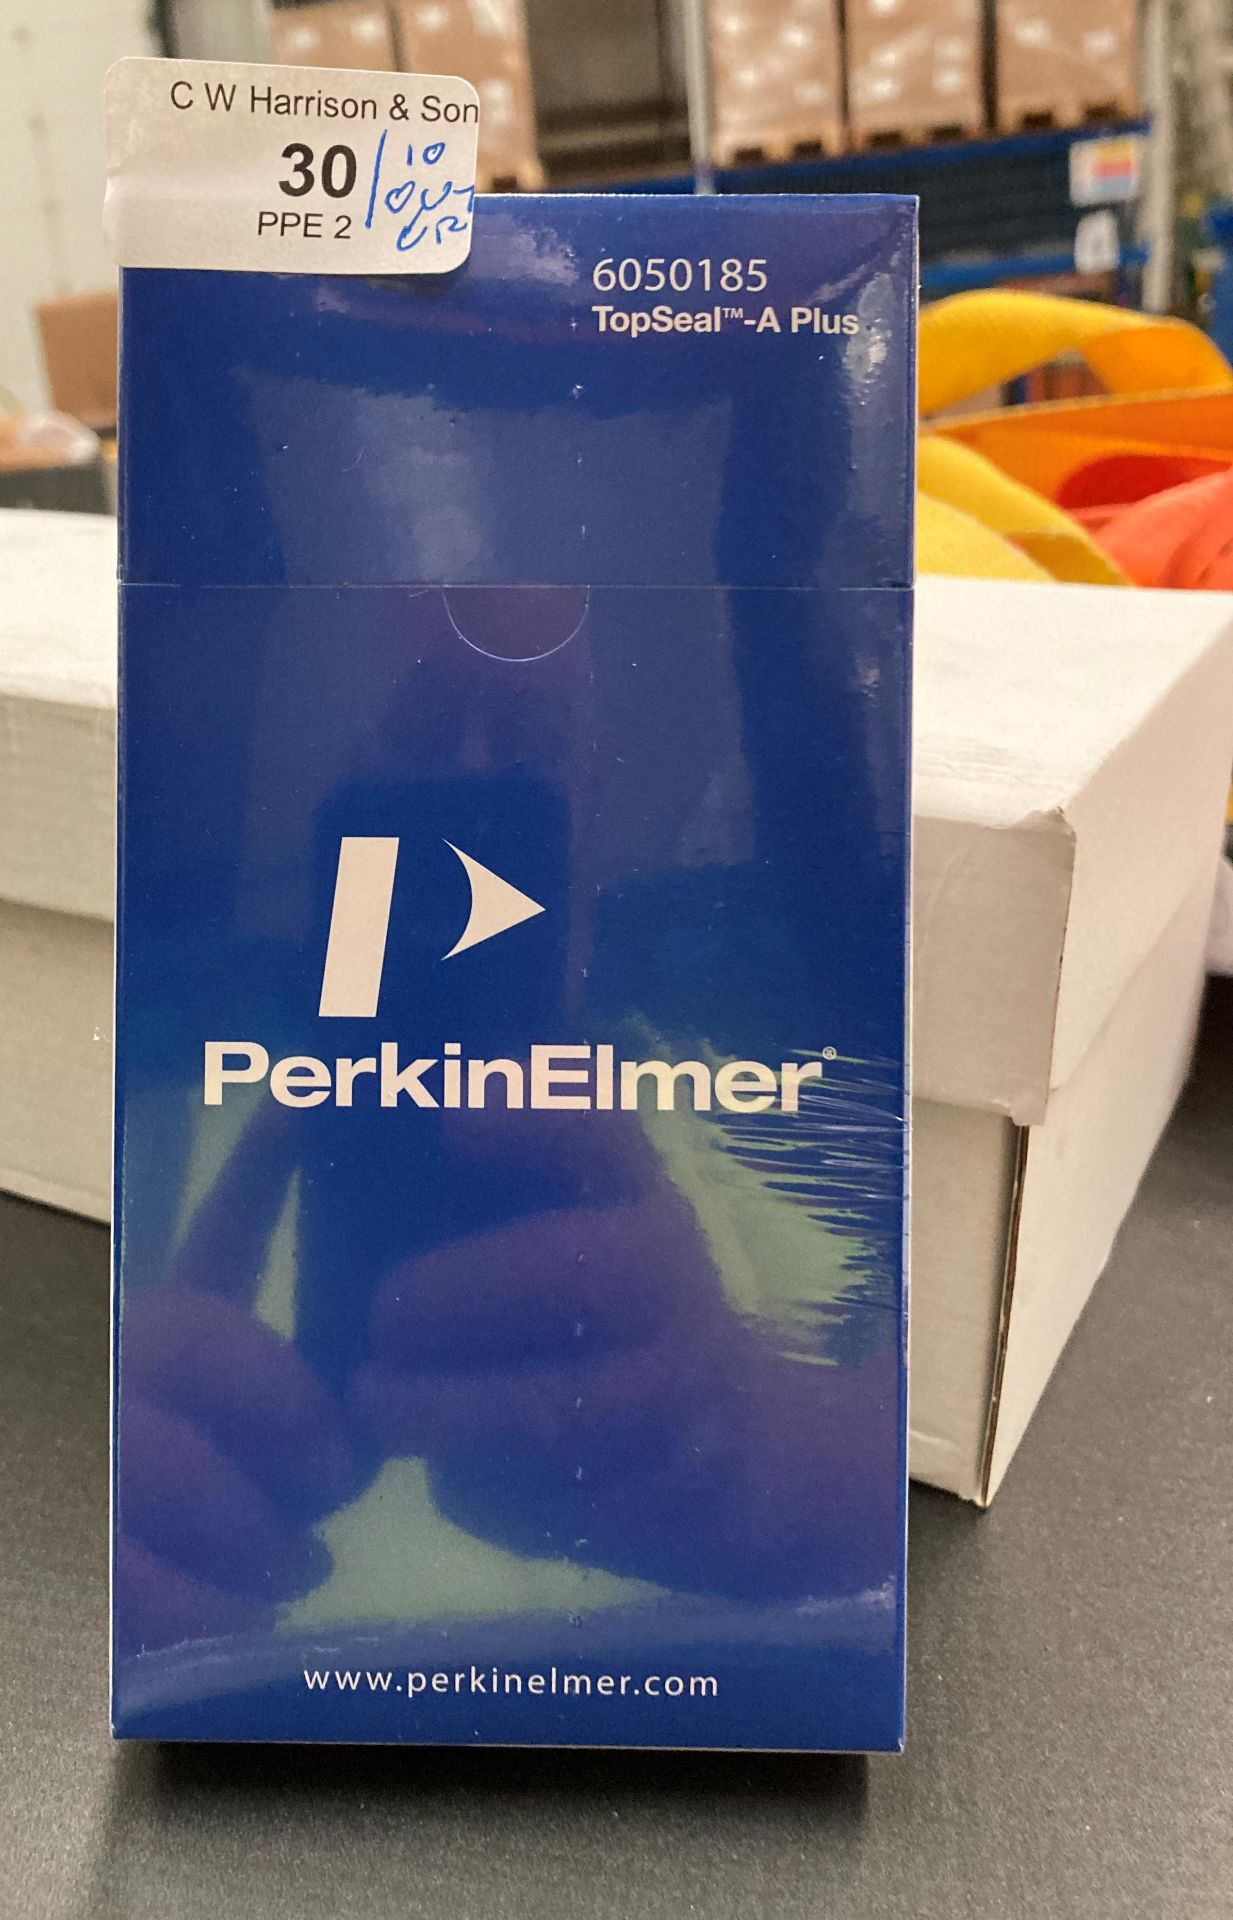 100 x Packs of PerkinElmer Top Seal - A Plus 6050185 clear adhesive microplate seals - 100 units - Image 4 of 5